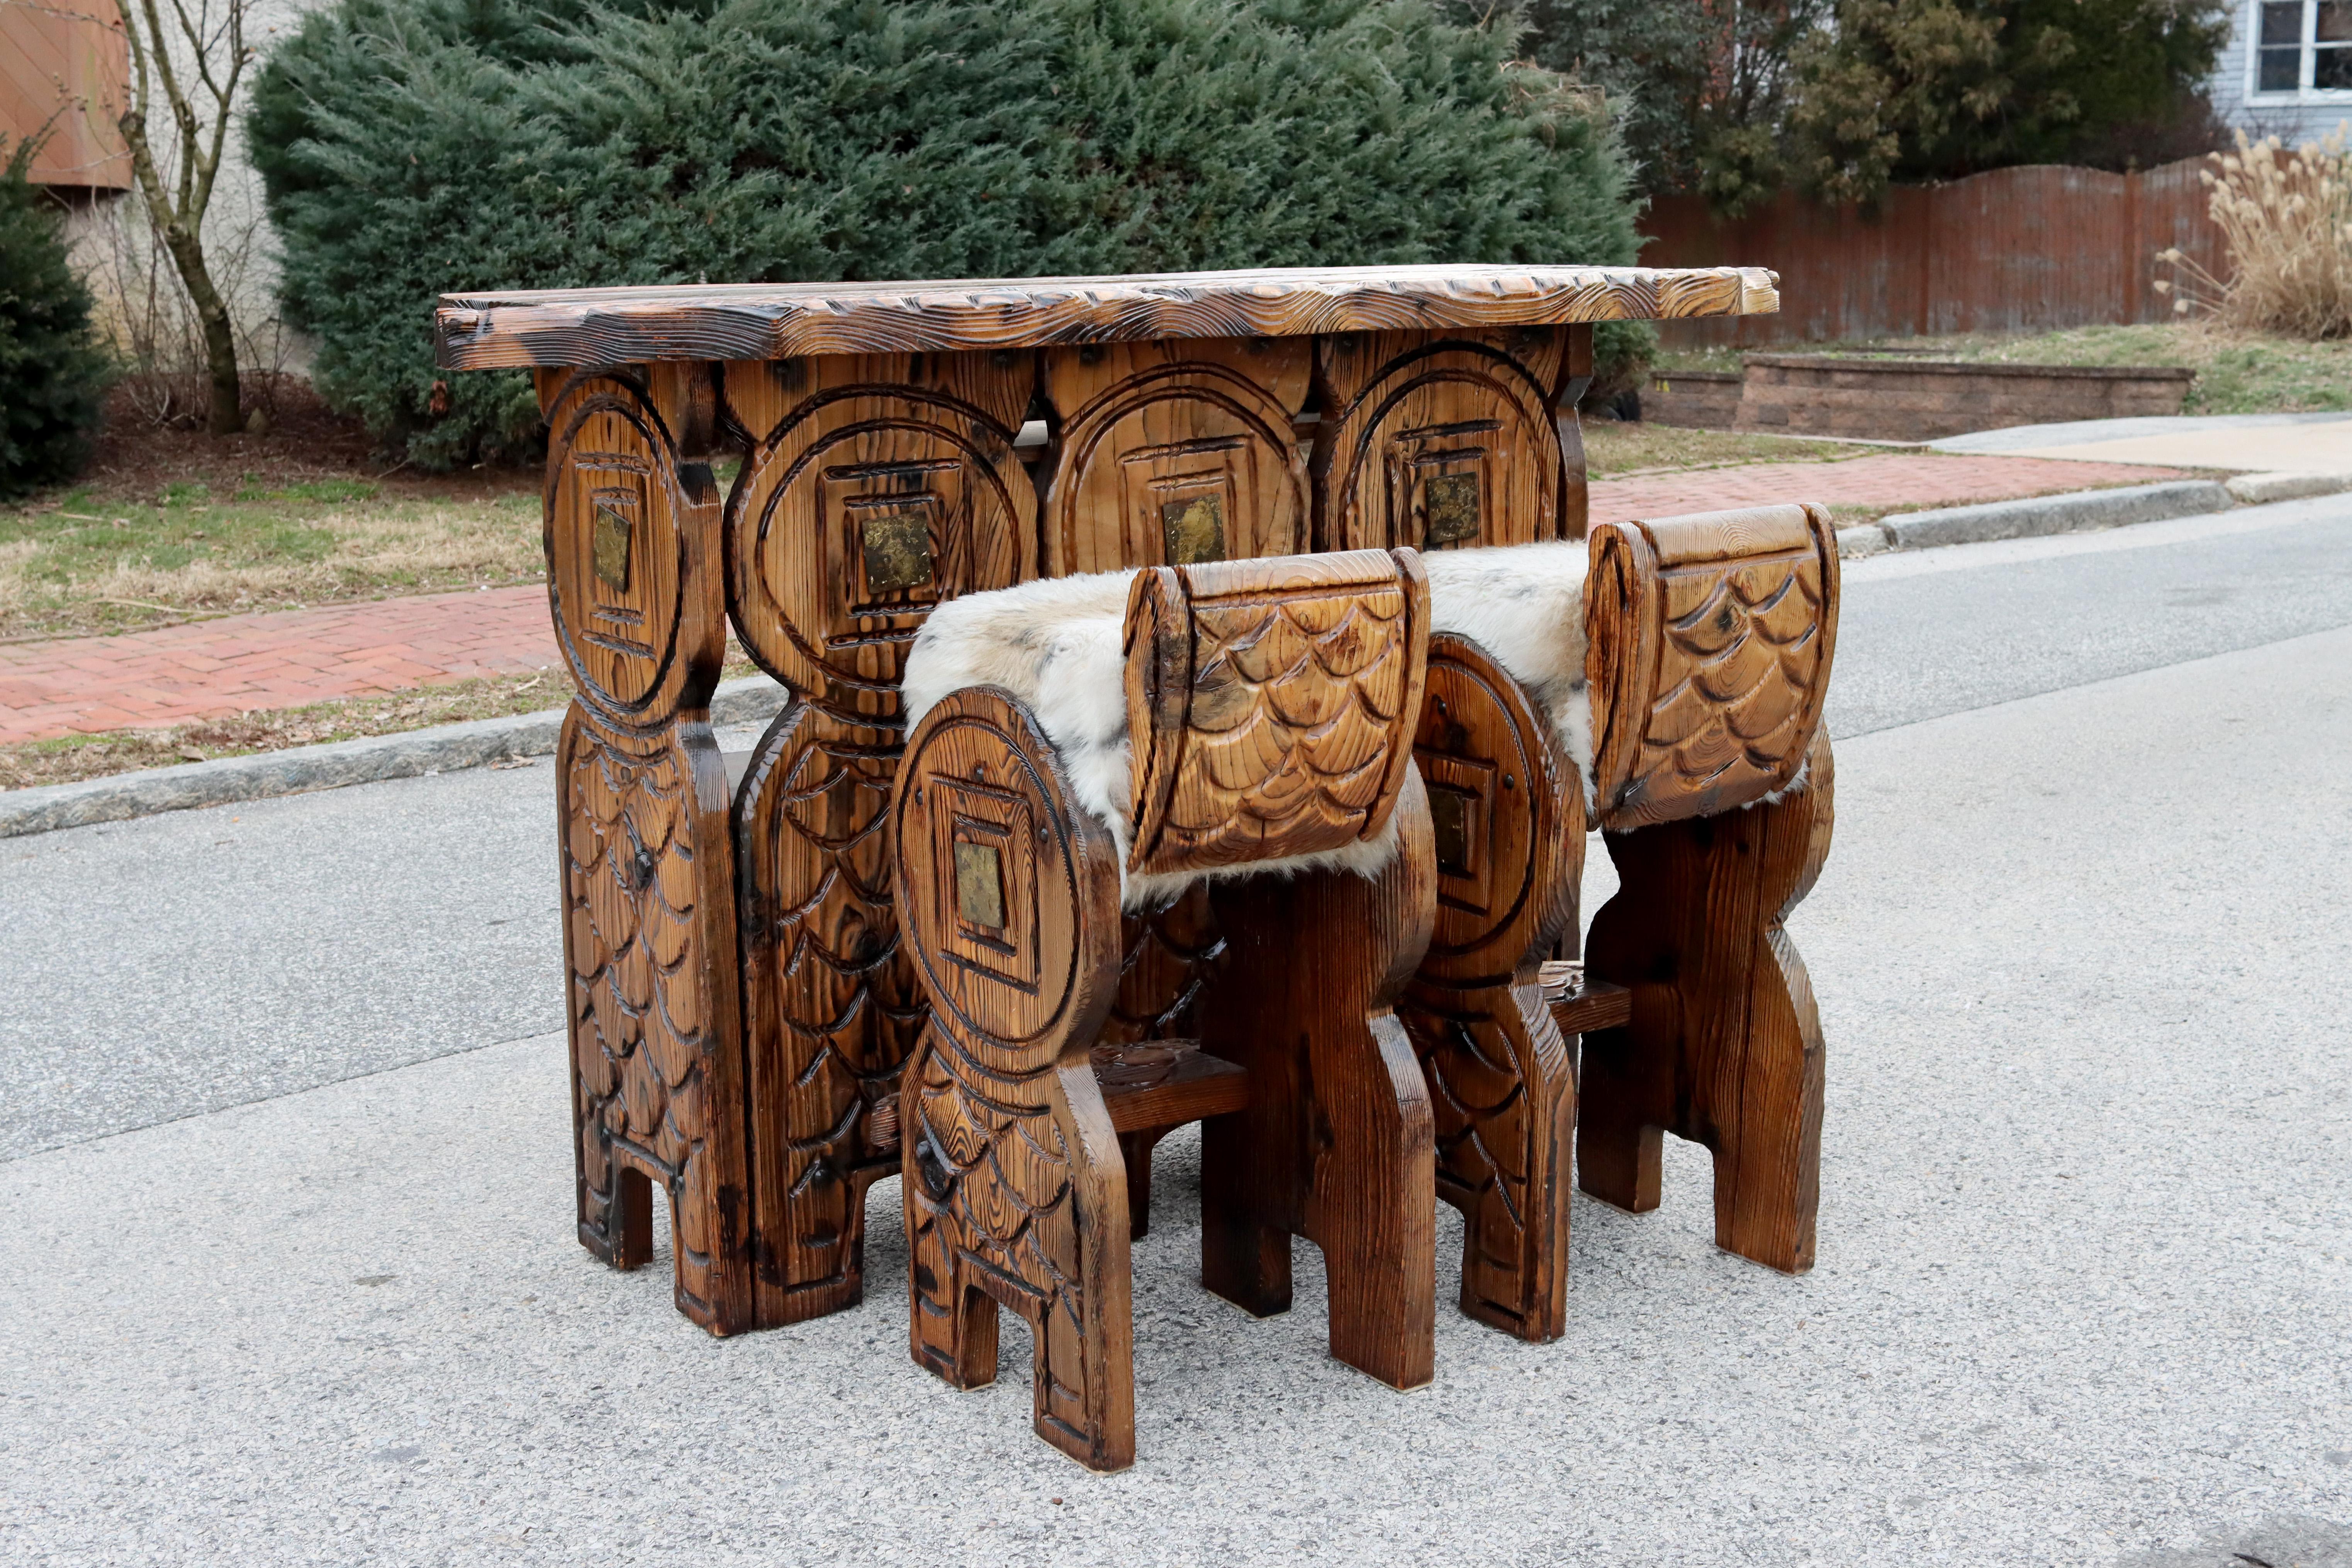 A beautiful and classic tiki bar set by the legendary manufacturer Witco. This bar comes from a whole line of dragon-themed furniture that Witco produced in the mid-20th century. The ends of the bar top extend into dragon heads and there are scale